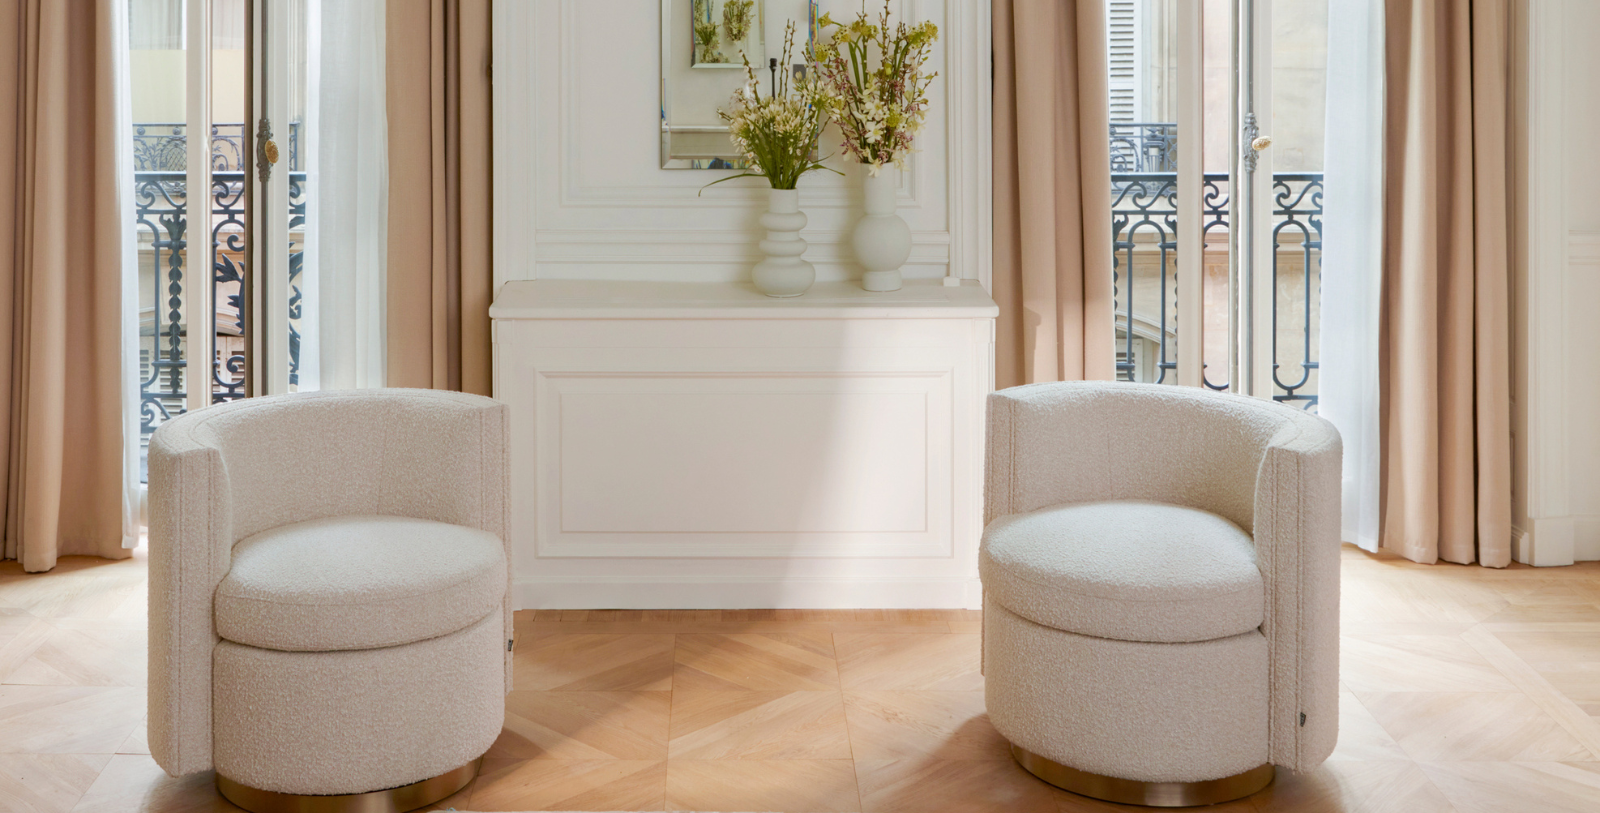 Discover the sumptuous yet stately character of Maison Delano Paris, which sits in an 18th-century former mansion known as a “hôtel particulier.”